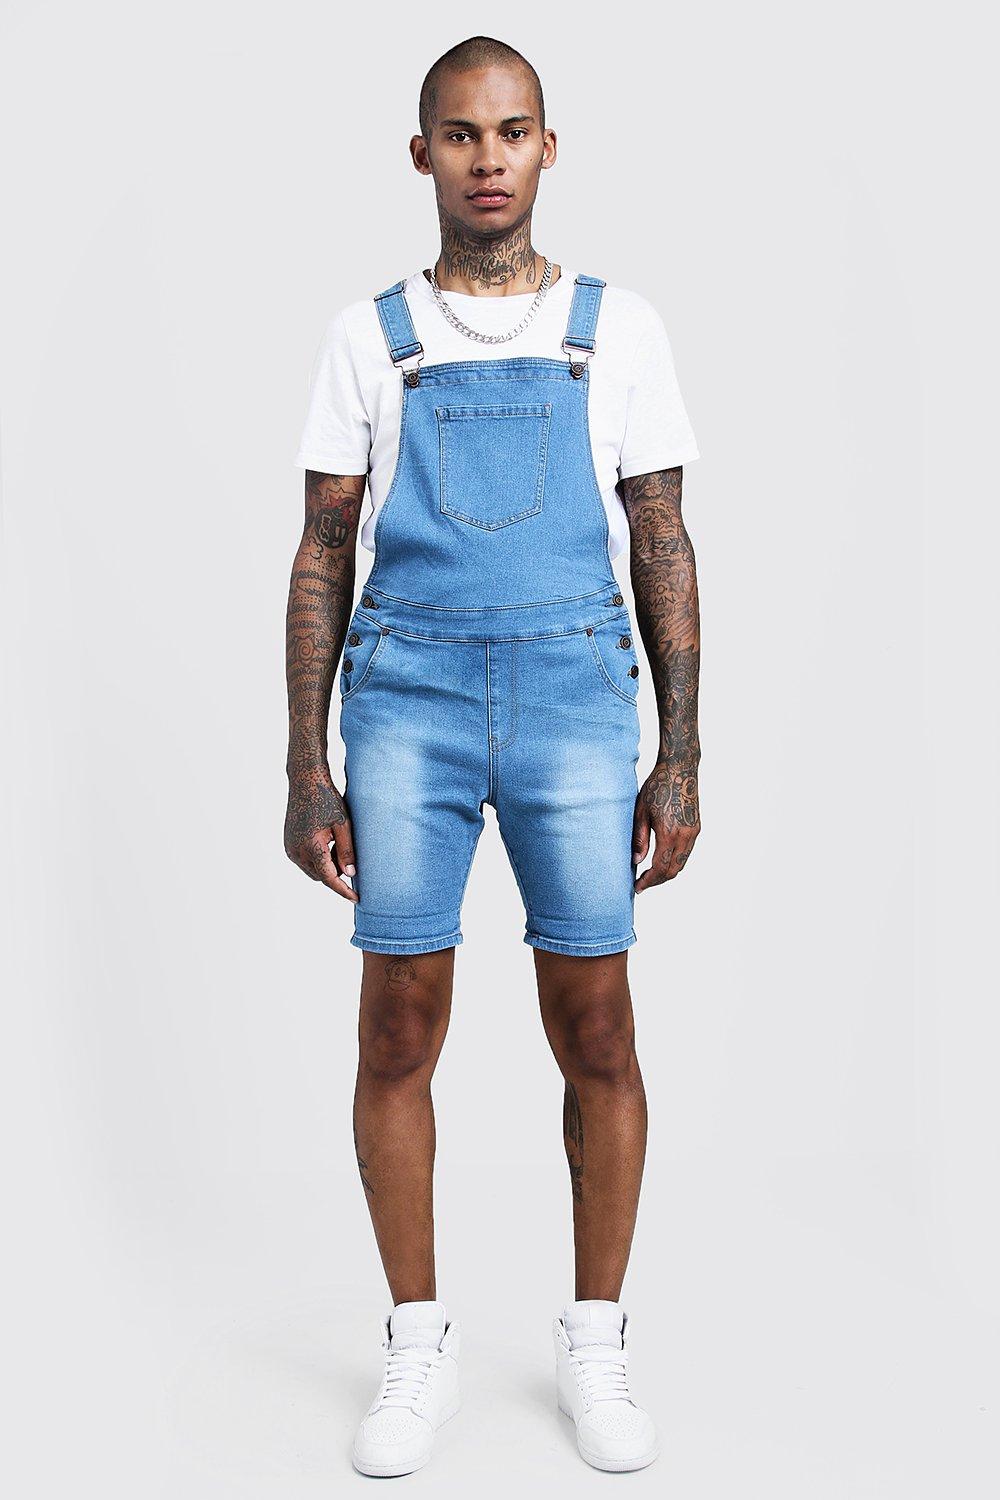 blue overall shorts